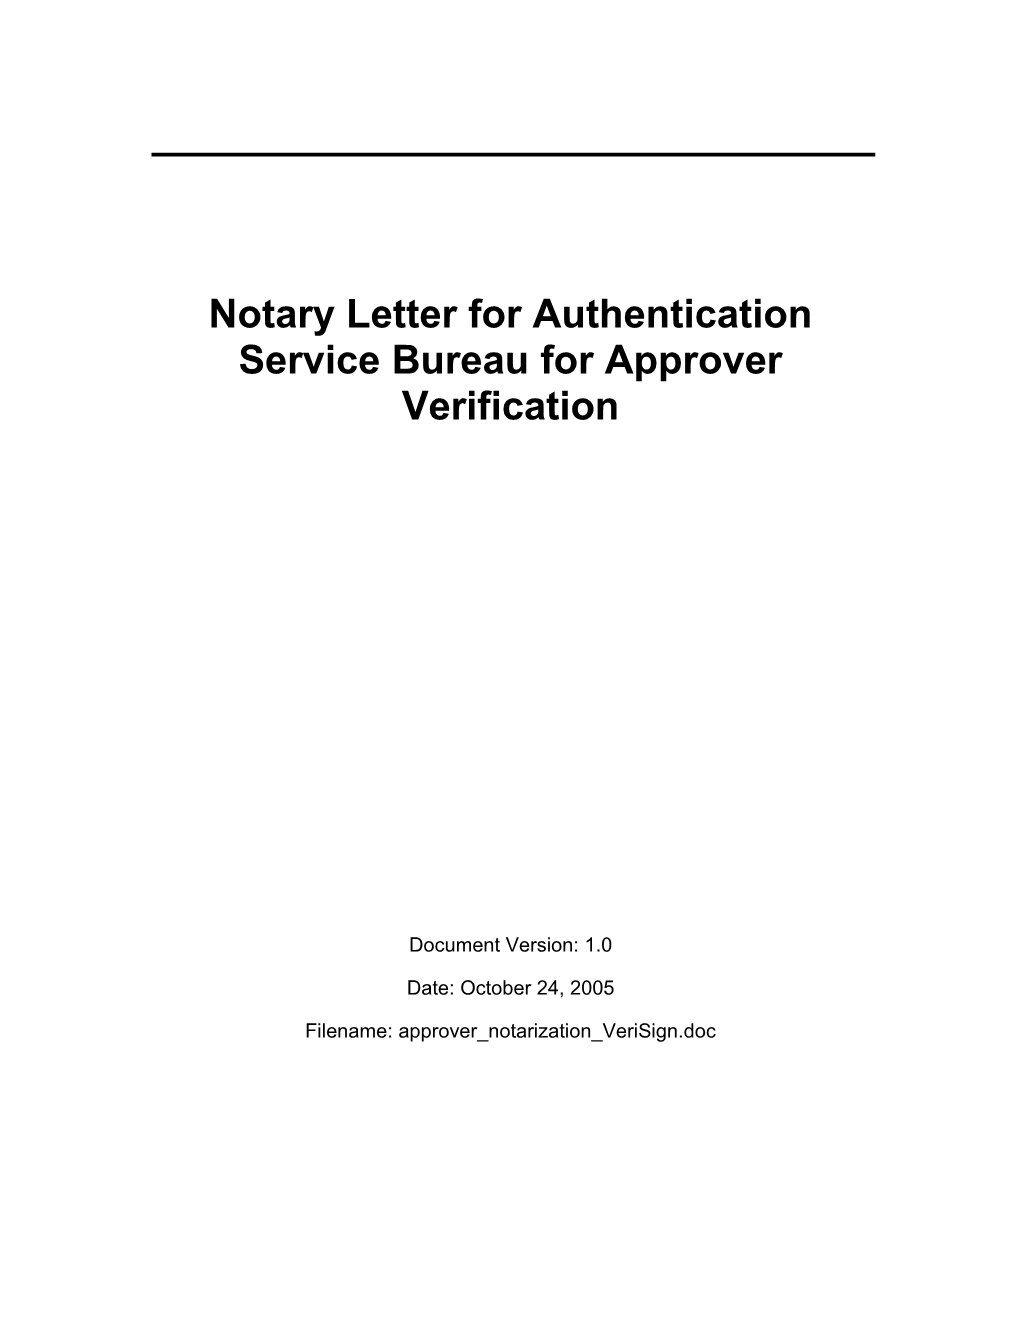 Notary Letter for Authentication Service Bureau for Approver Verification